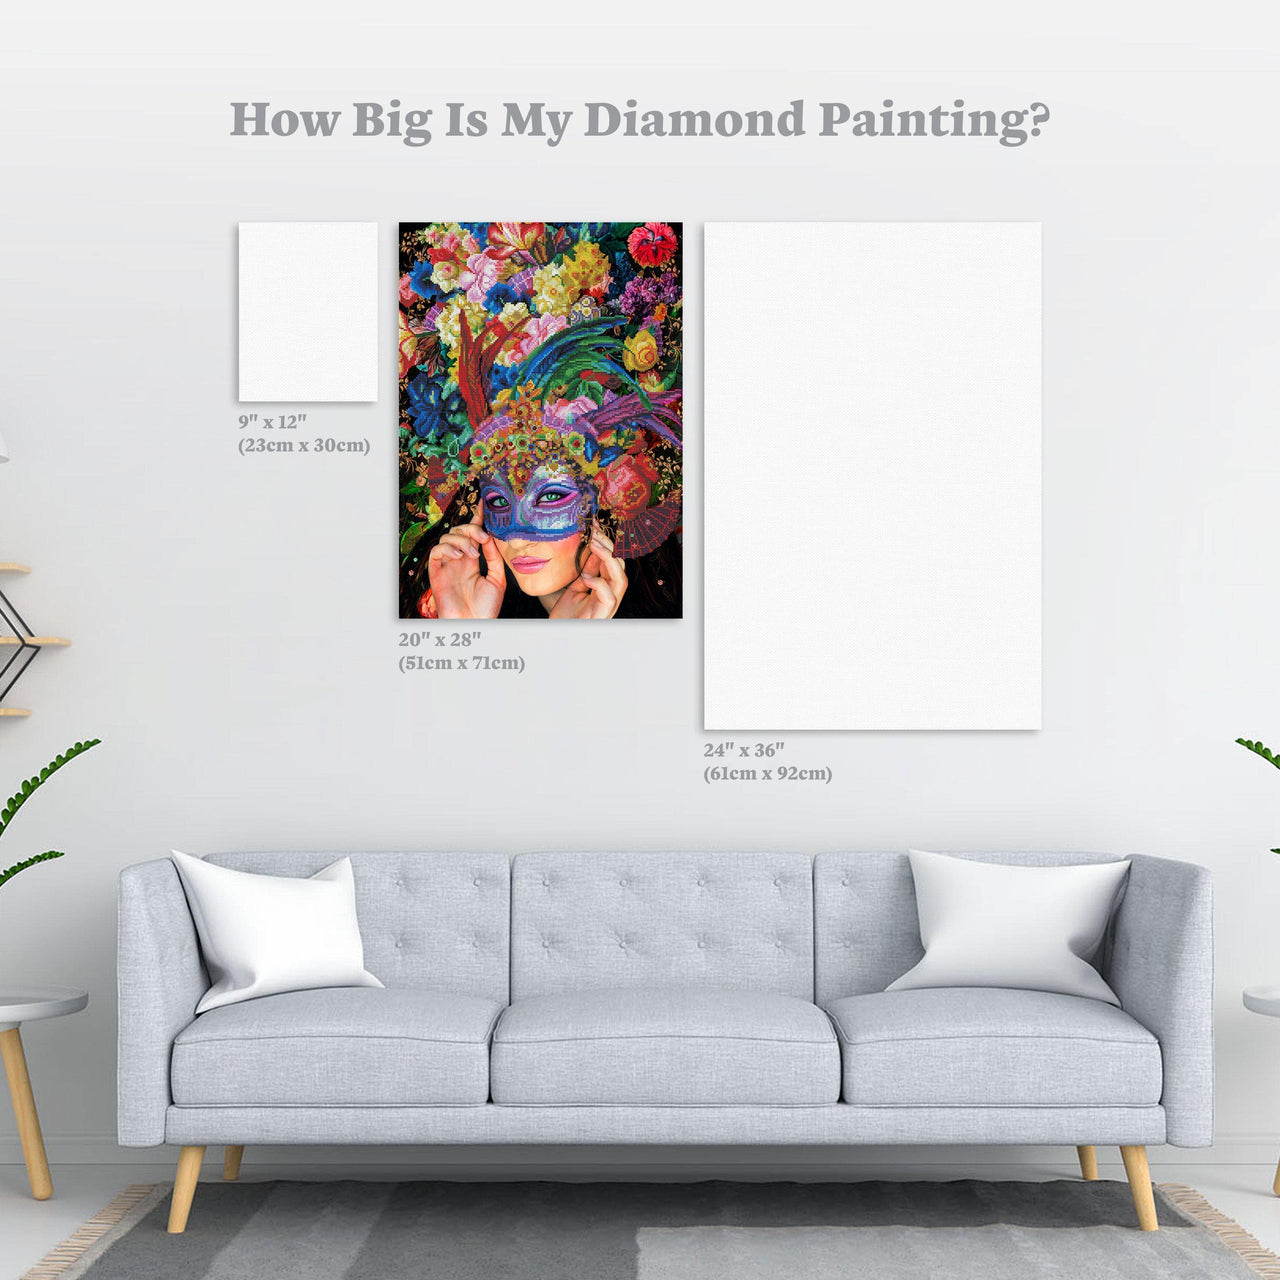 Diamond Painting The Mascheraris Muse 20" x 28″ (51cm x 71cm) / Round with 50 Colors including 2 ABs and 1 Special Diamond